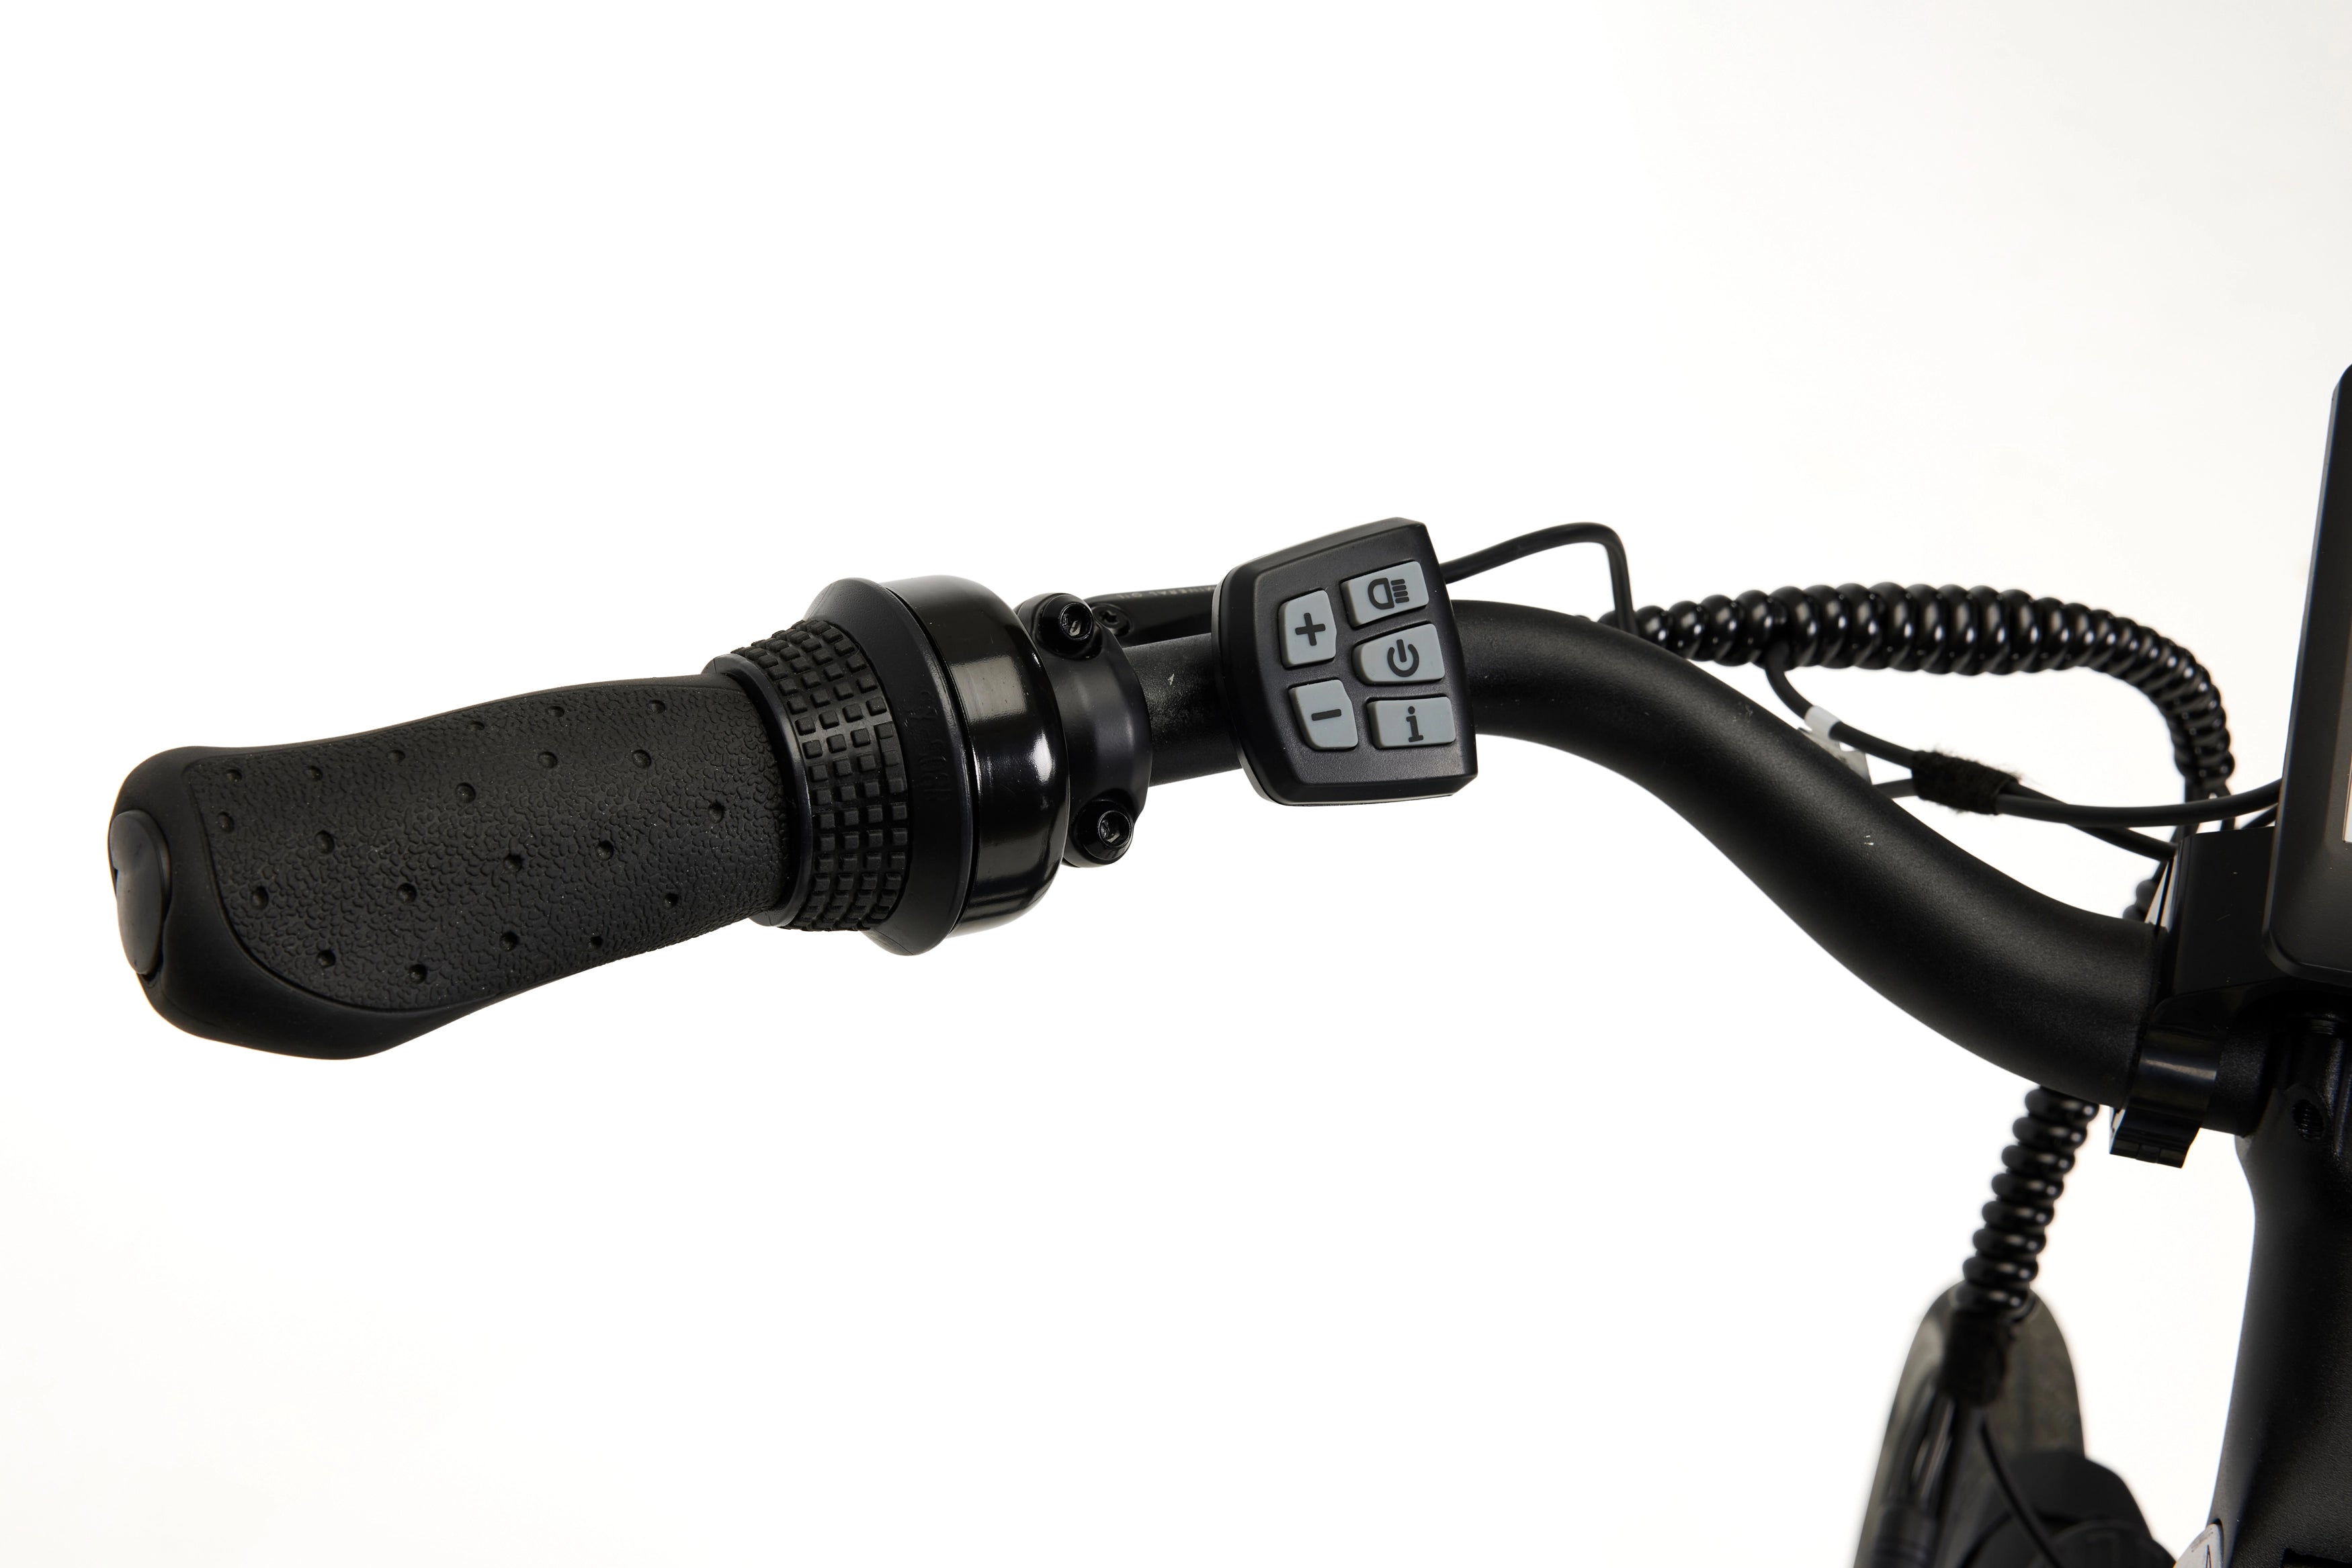 A close-up photo of the controls on the left side of the handlebars of the Veloci Solid electric bike. The controls for the electric assist are shown beside the handlebar grips. 